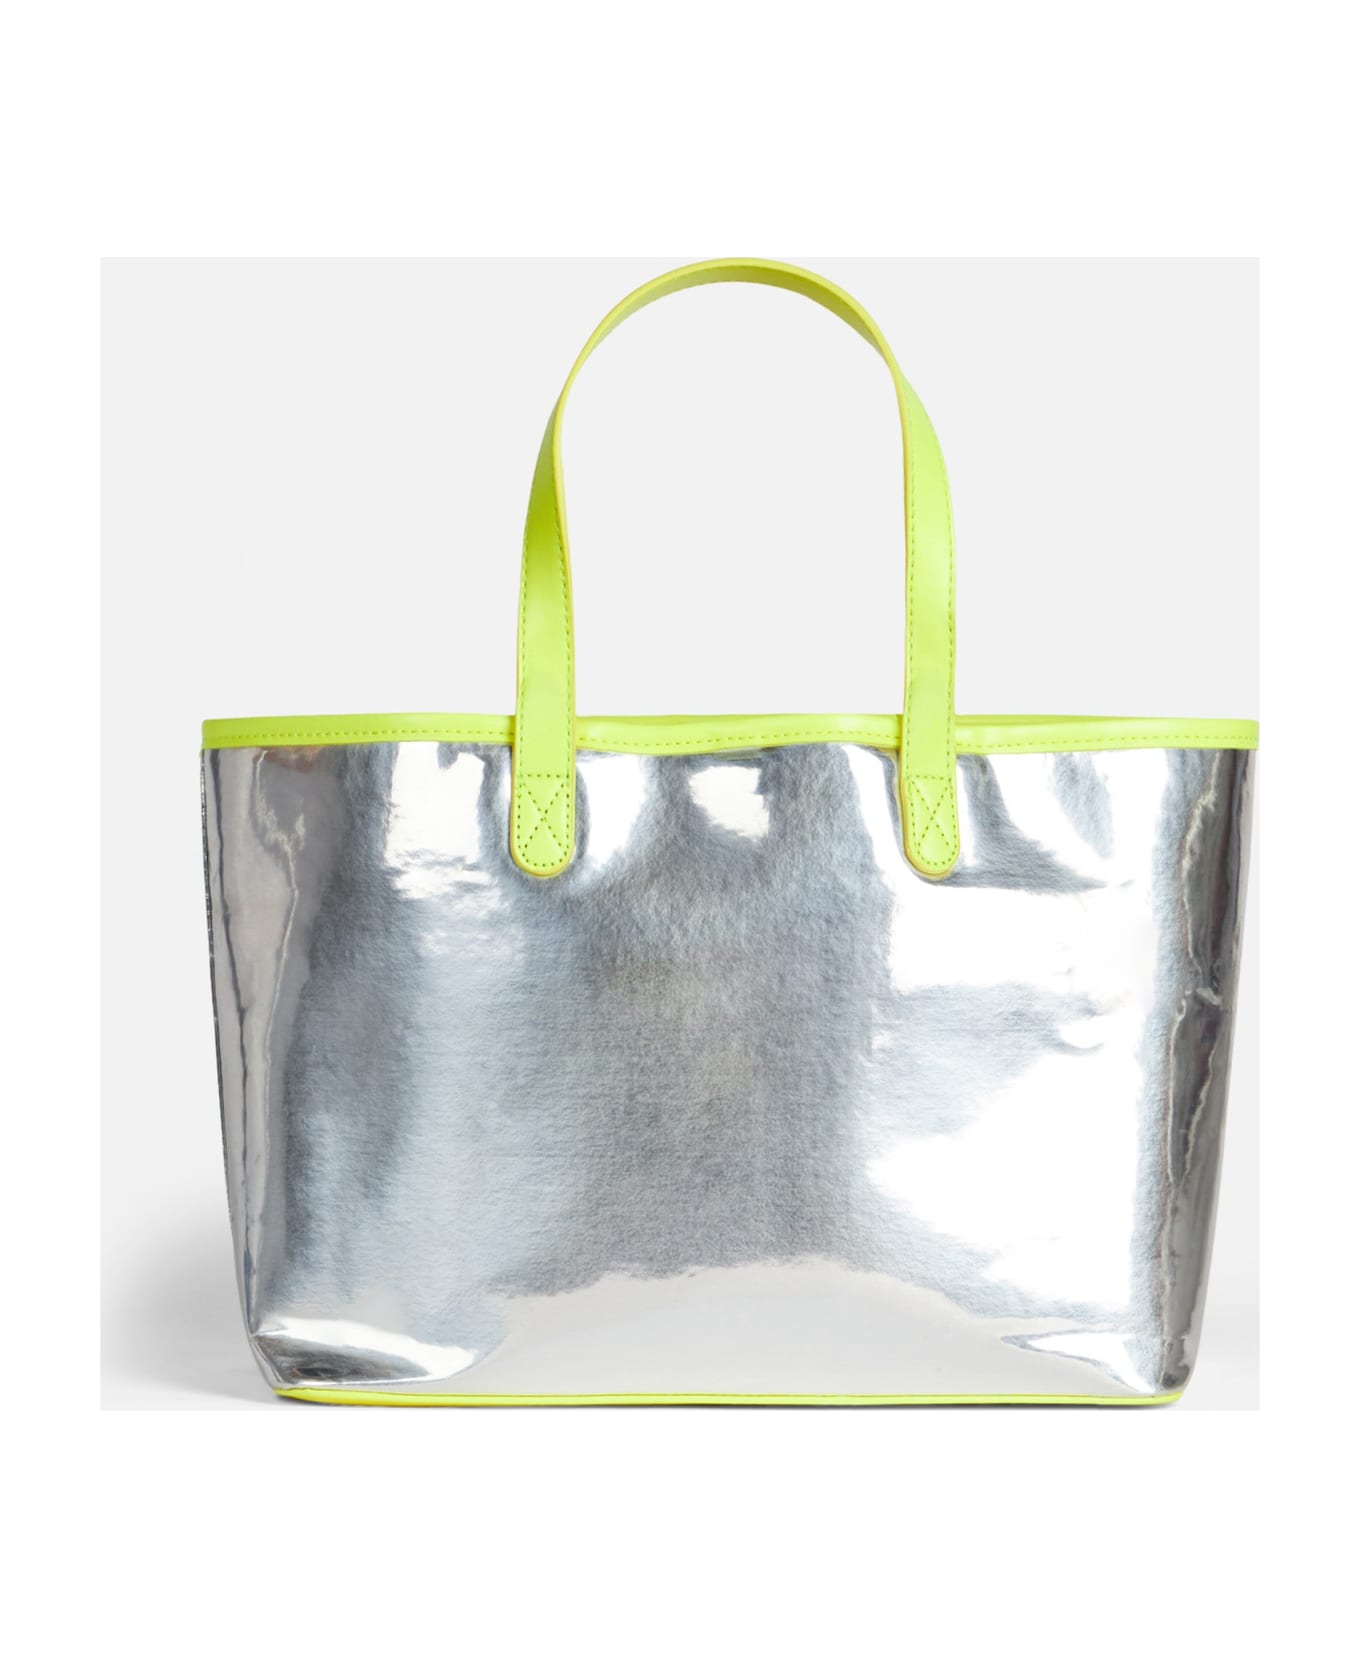 MC2 Saint Barth Silver Reflex Bag With Yellow Fluo Details - YELLOW